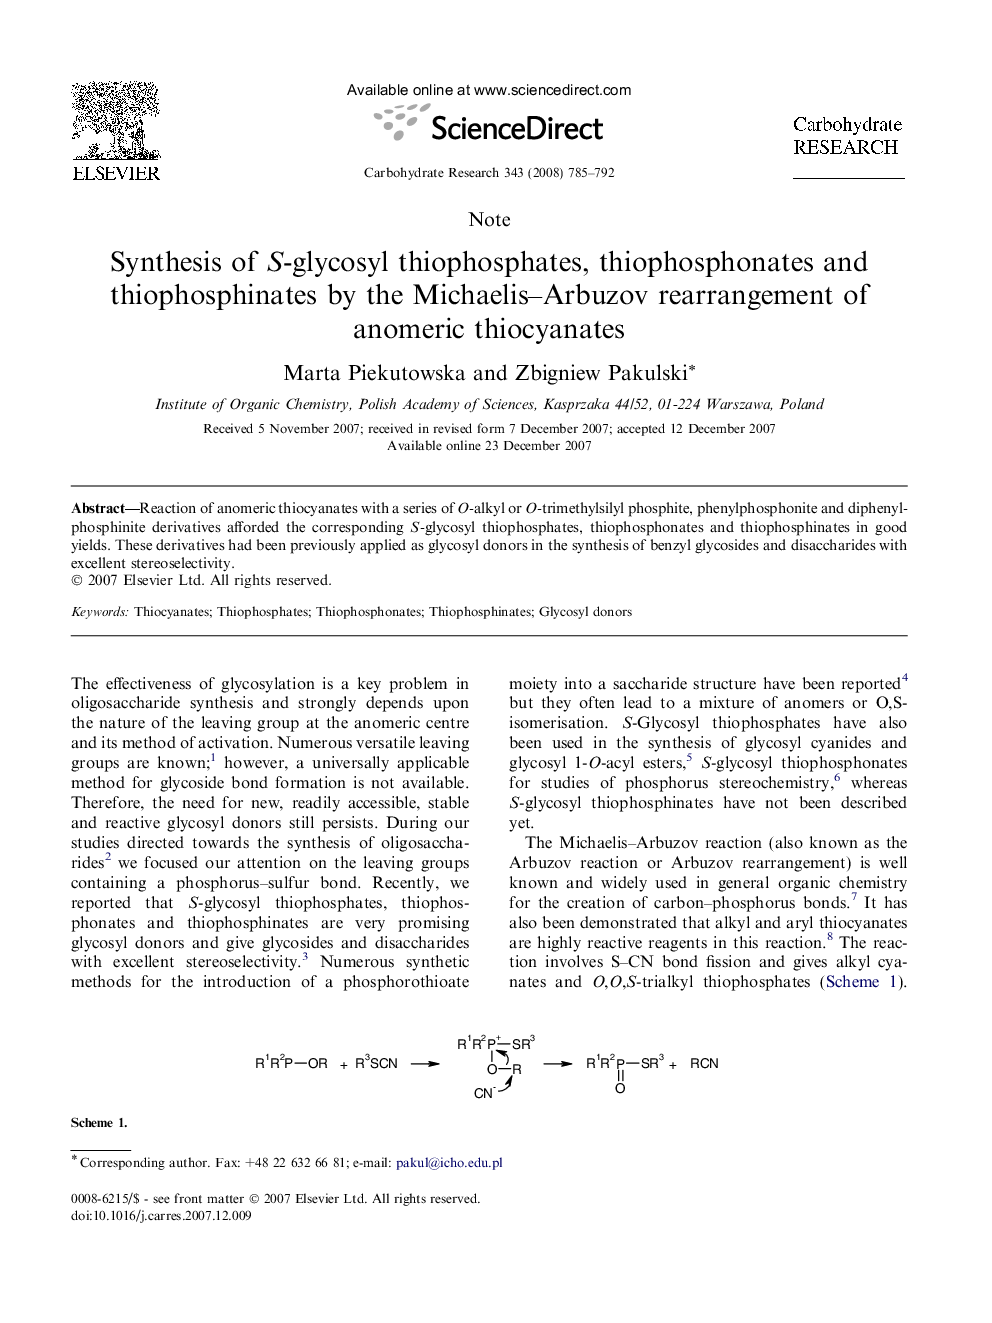 Synthesis of S-glycosyl thiophosphates, thiophosphonates and thiophosphinates by the Michaelis–Arbuzov rearrangement of anomeric thiocyanates